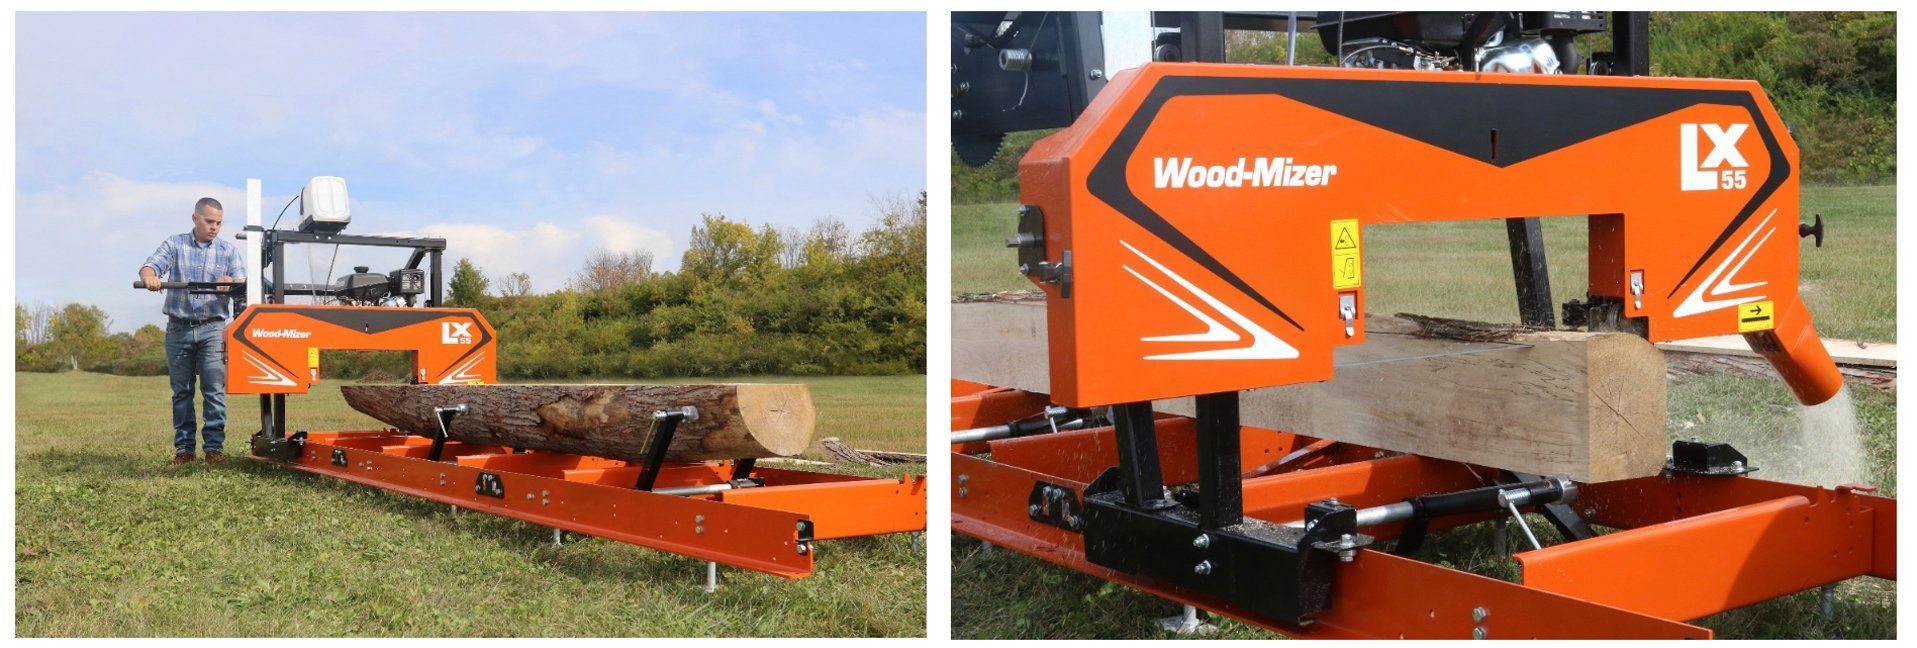 Wood-Mizer Introduces Entry-Level LX55 Portable Sawmill